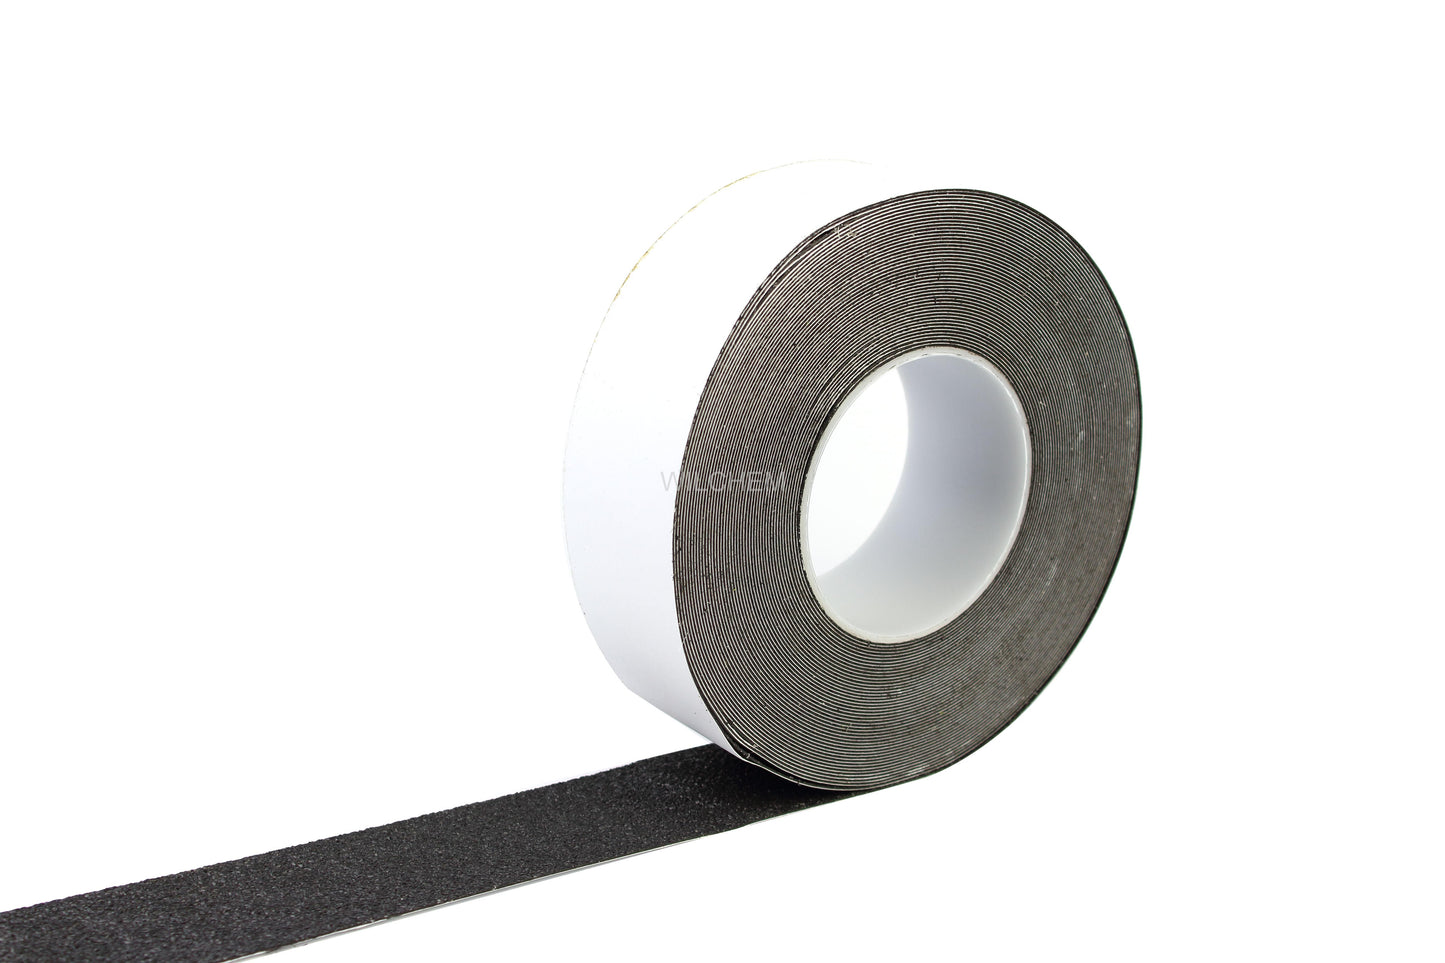 Heskins Flexi Grip Non-Abrasive Anit-Slip Tape. Is designed for gun grips on firearms. Perfect on sliders, magazines, handguards, and pistol grips, to name a few.